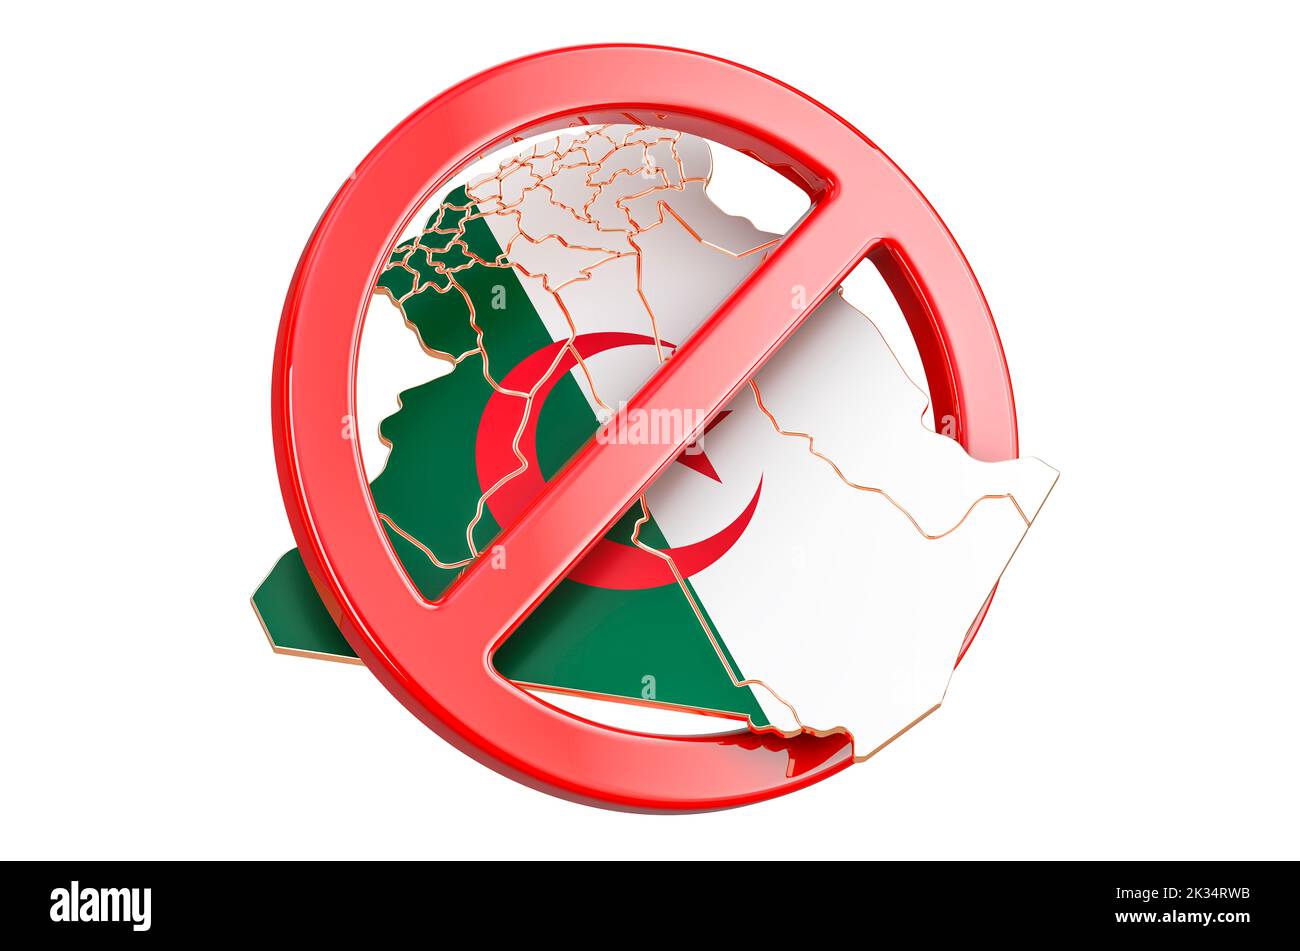 Algerian map with forbidden sign, 3D rendering isolated on white background Stock Photo